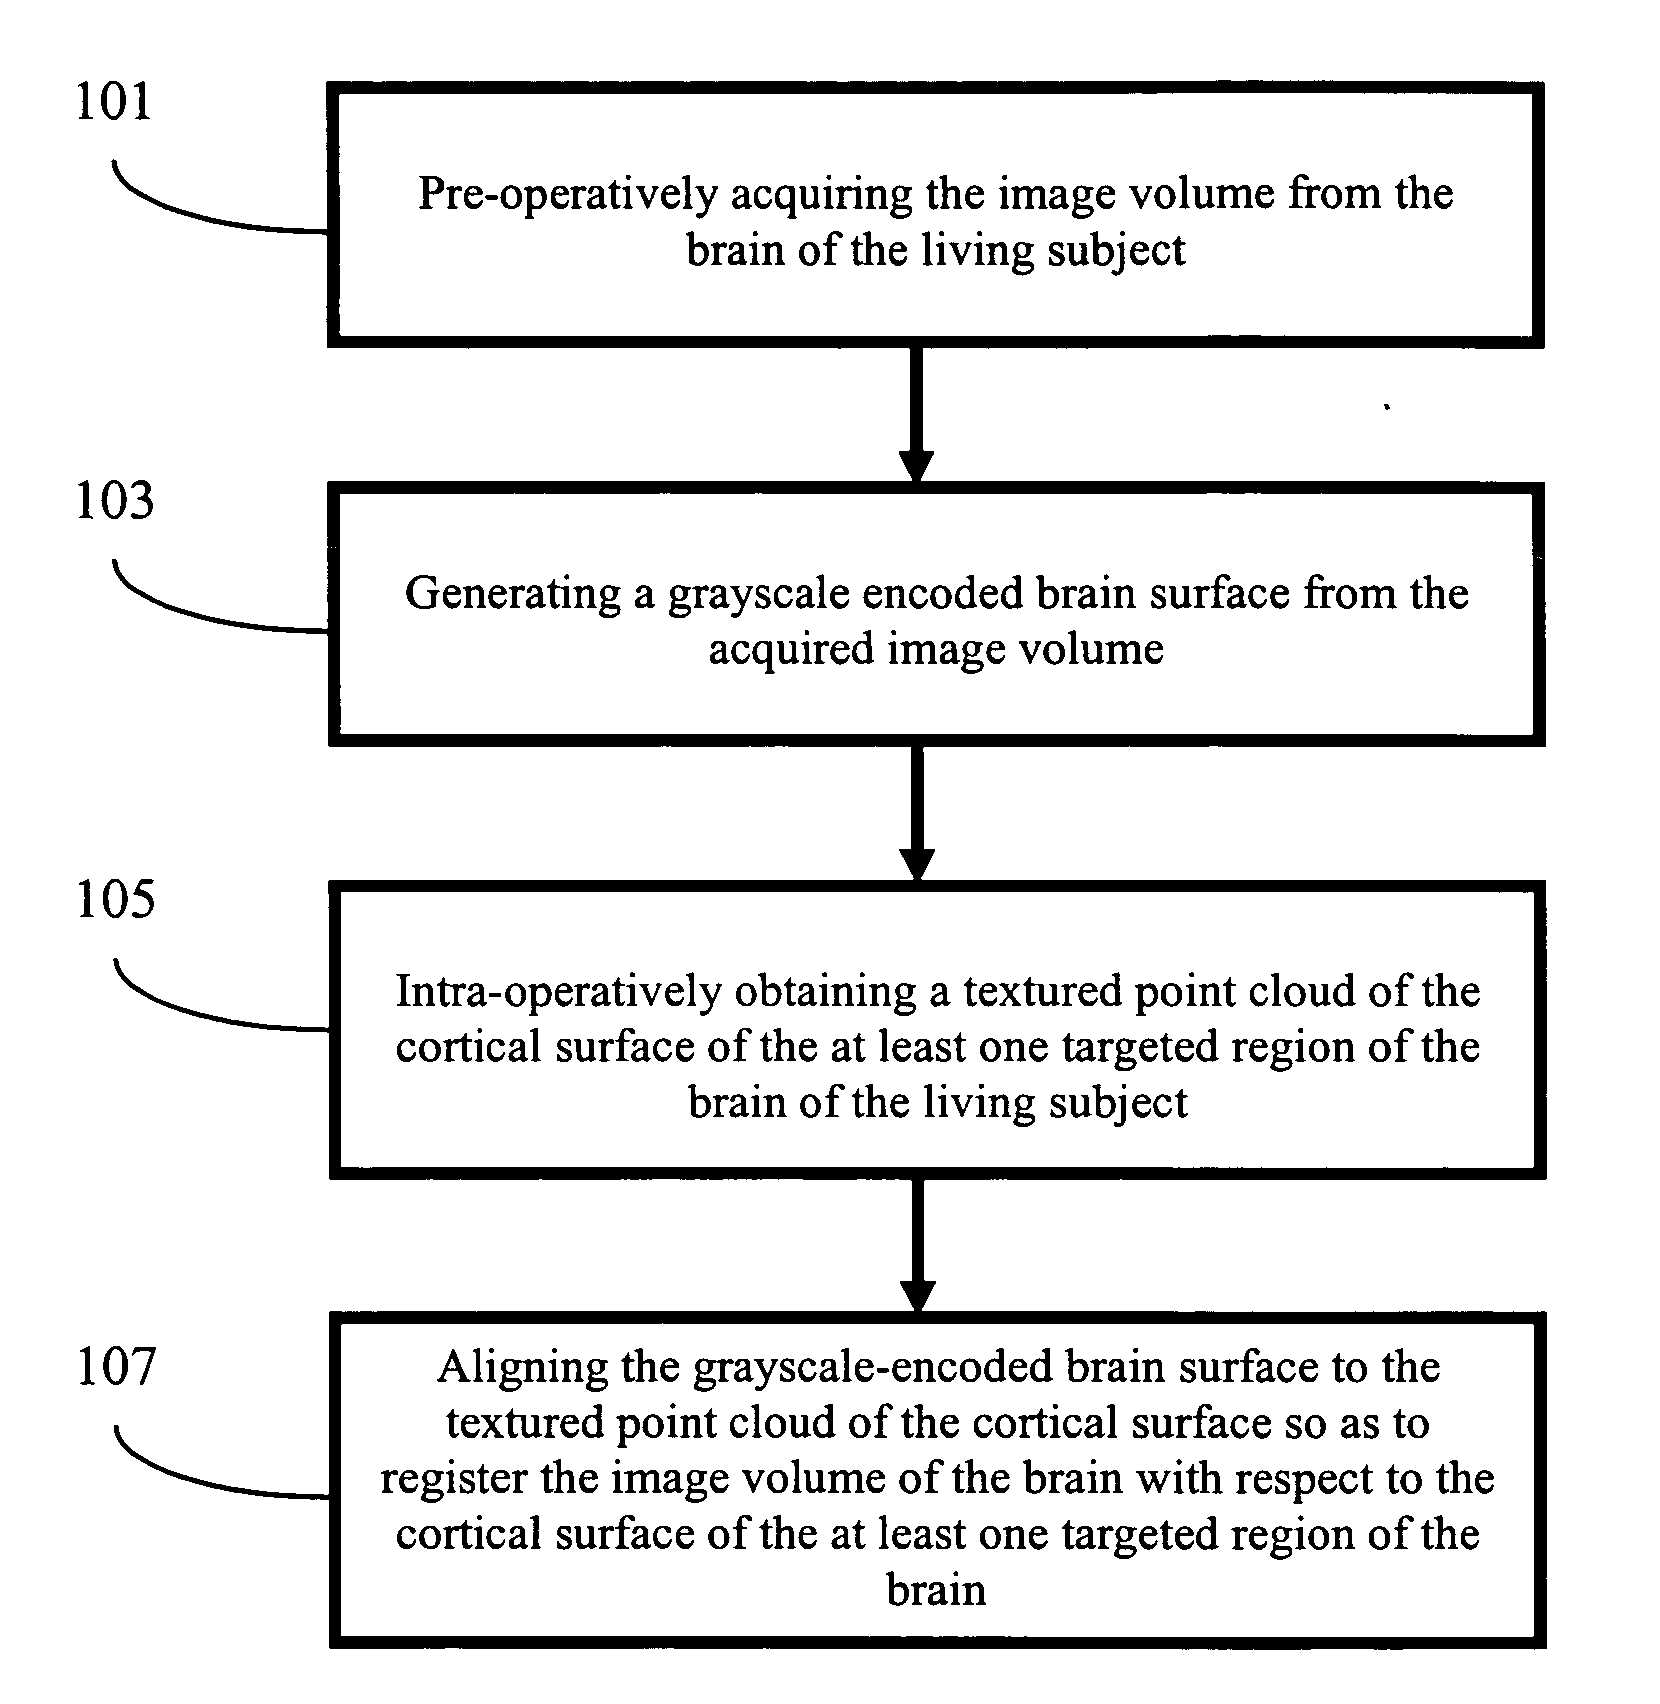 Apparatus and methods of cortical surface registration and deformation tracking for patient-to-image alignment in relation to image-guided surgery